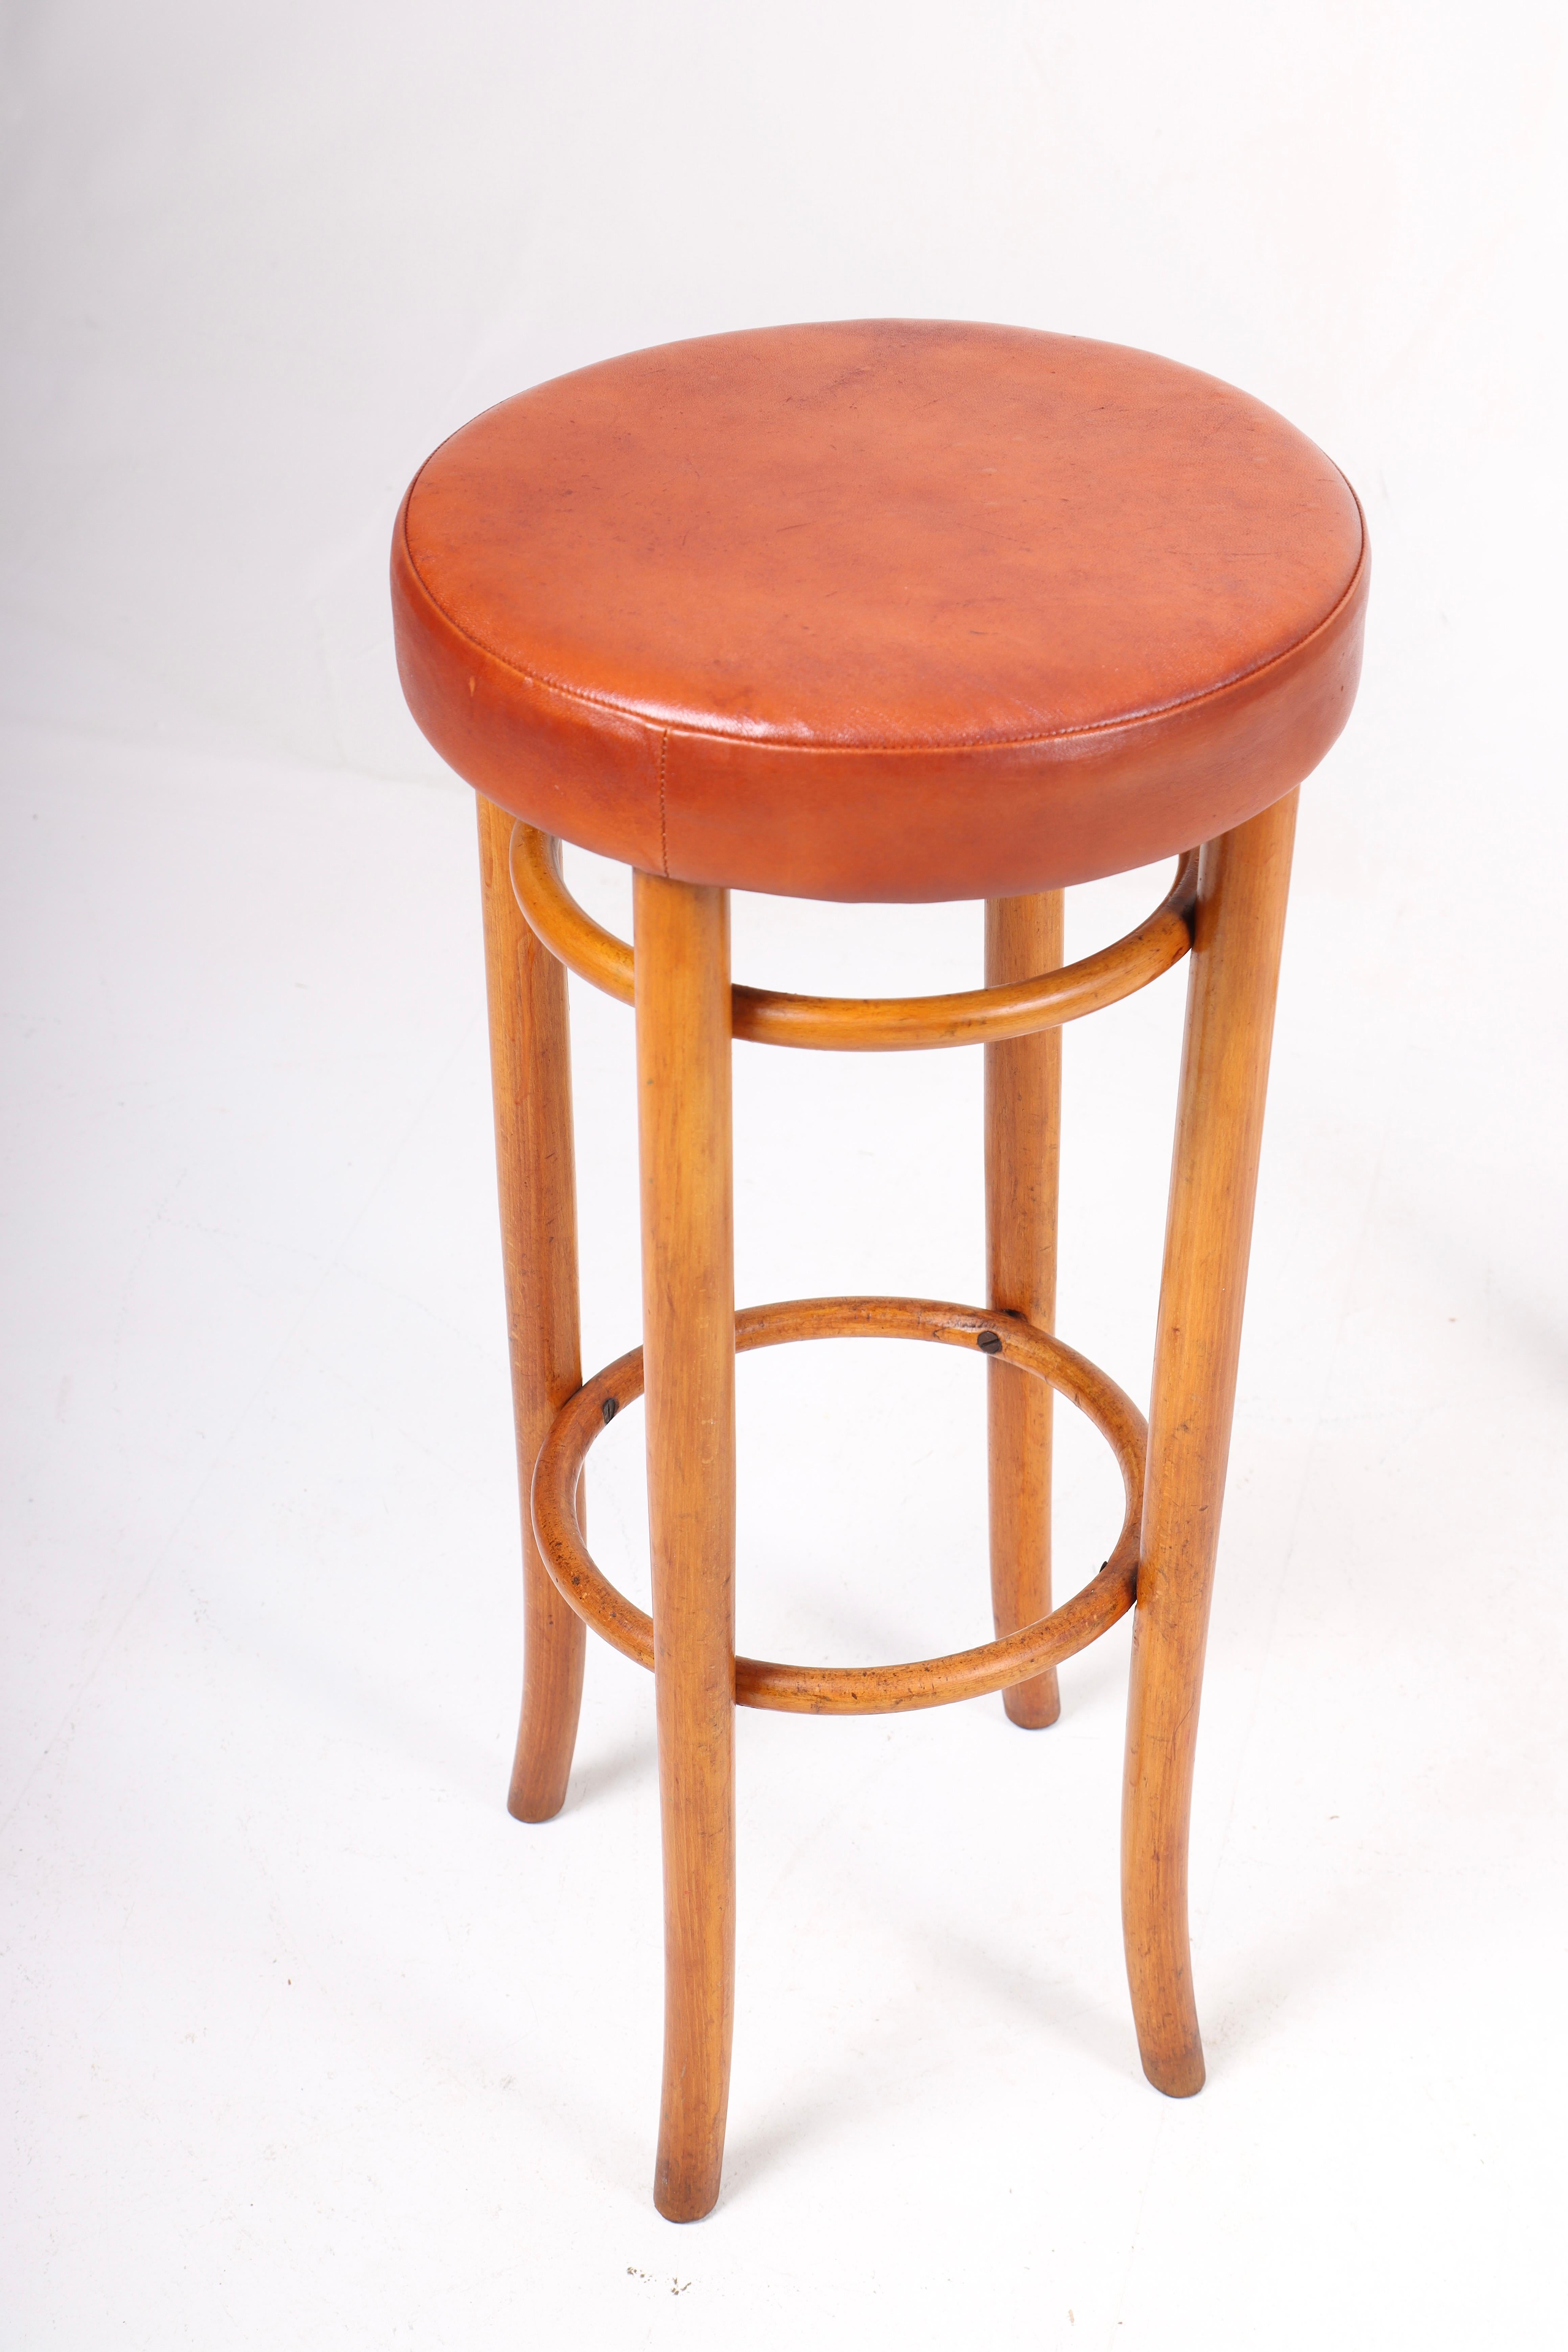 Scandinavian Modern Pair of Bar Stools in Beech and Patinated Leather by Fritz Hansen, 1940s For Sale